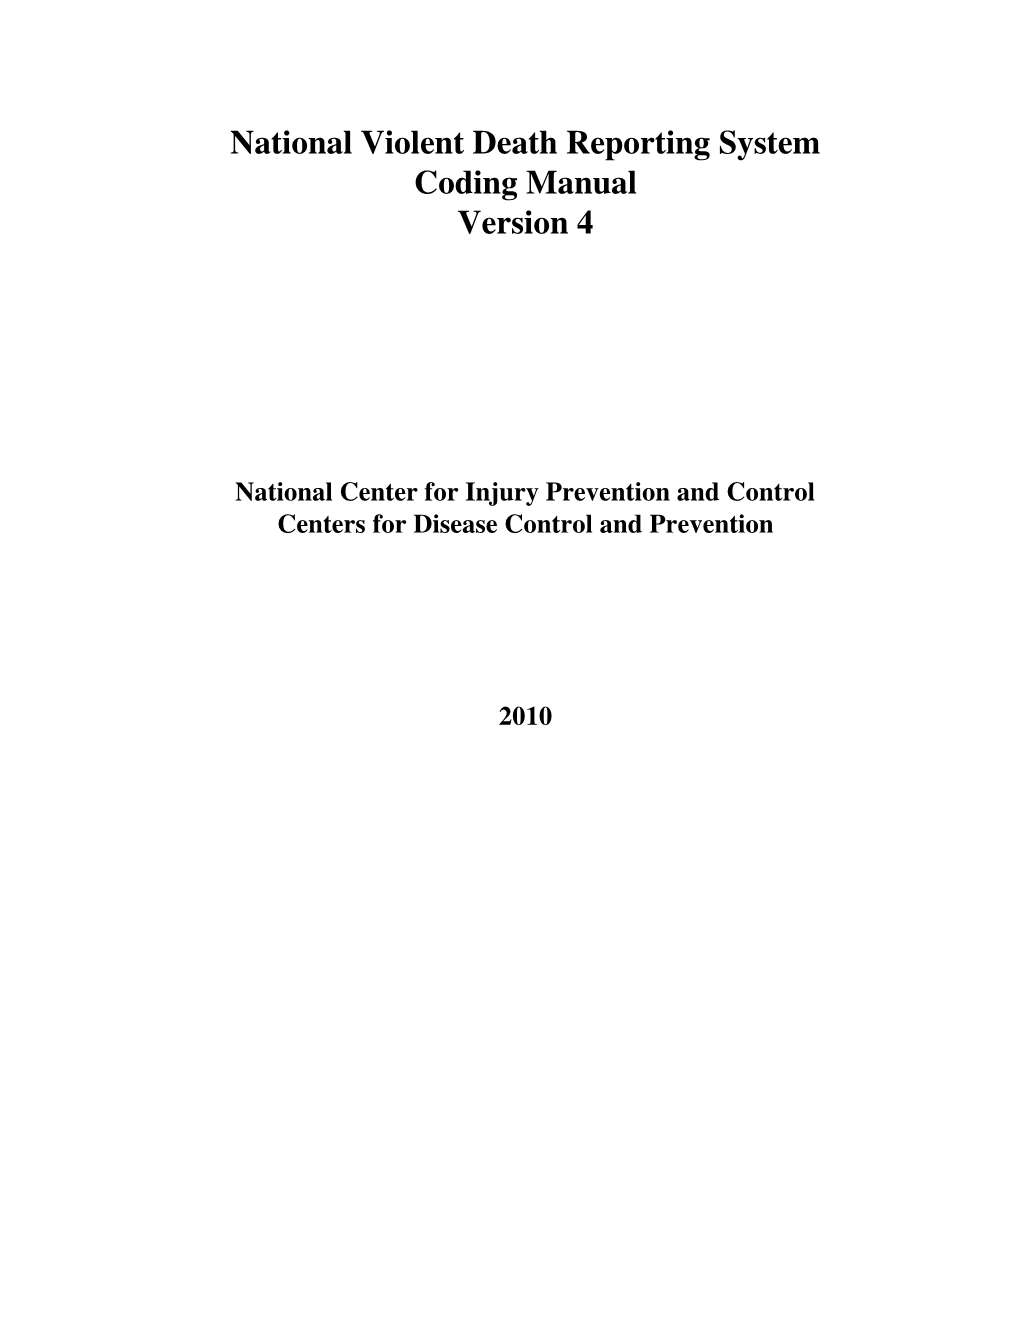 National Violent Death Reporting System Coding Manual Version 4